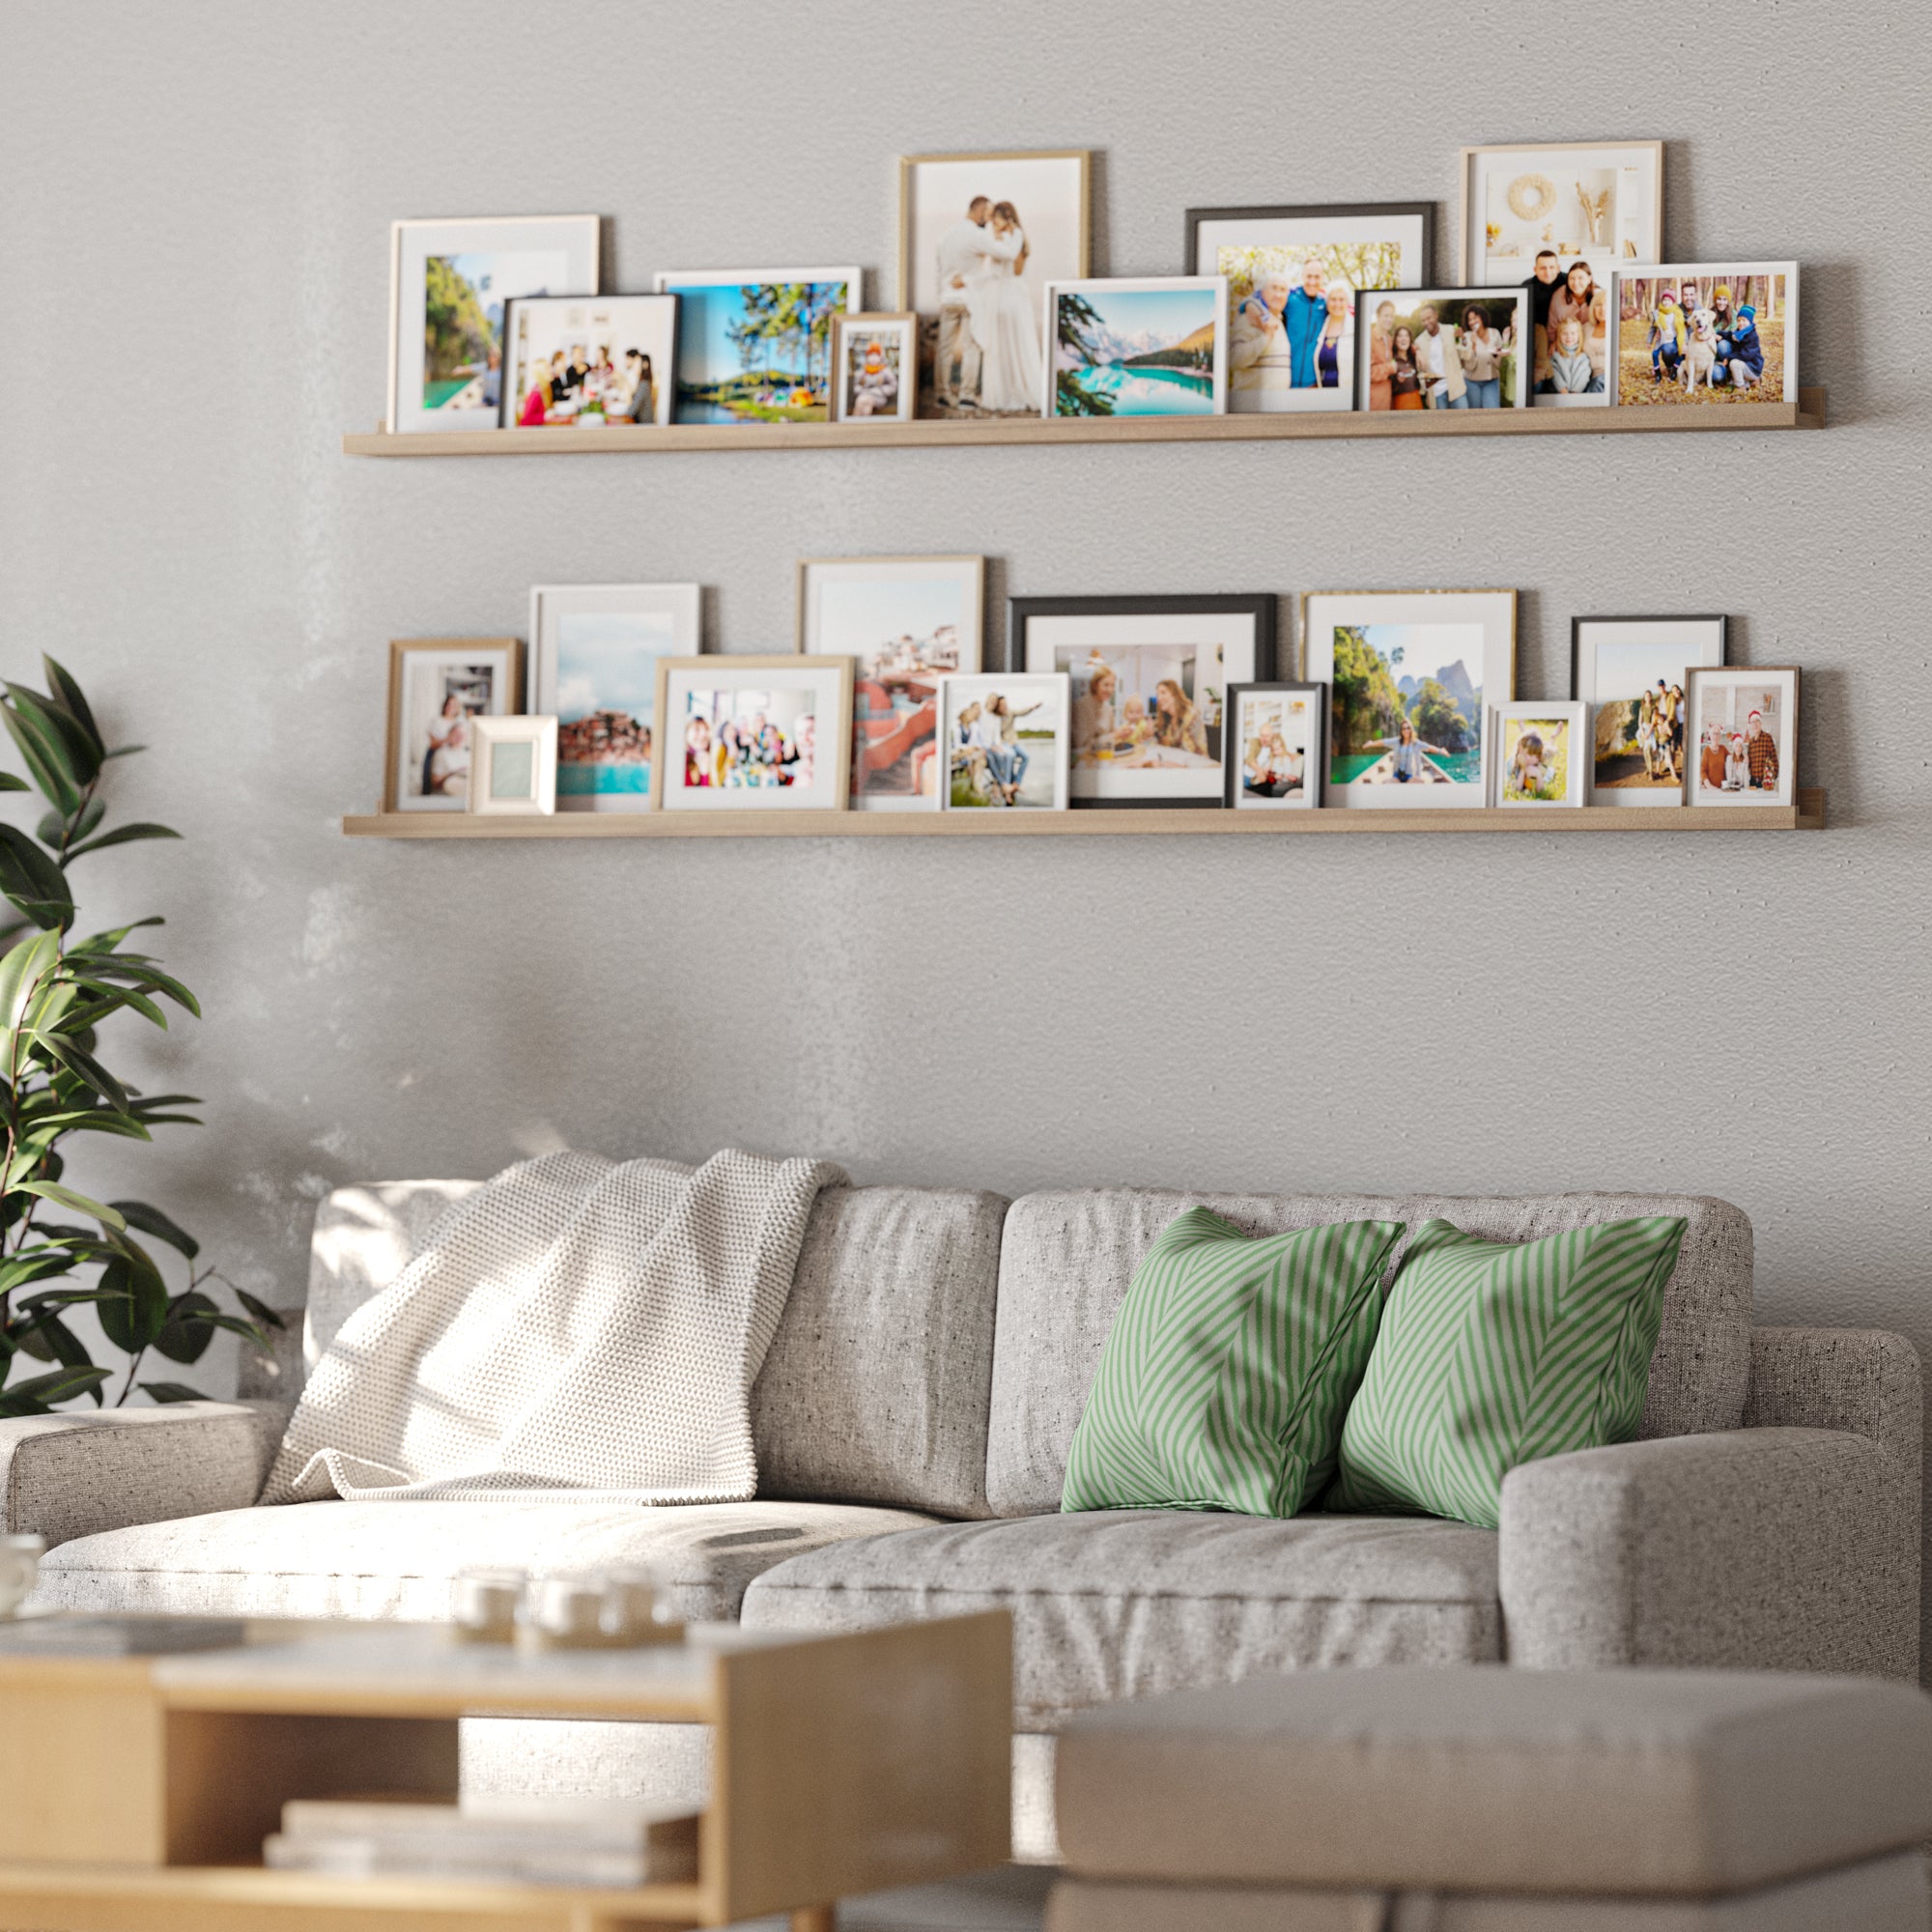 A living room with a cozy couch and green pillows, and above it, two picture shelvesdisplaying a collection of framed photographs.